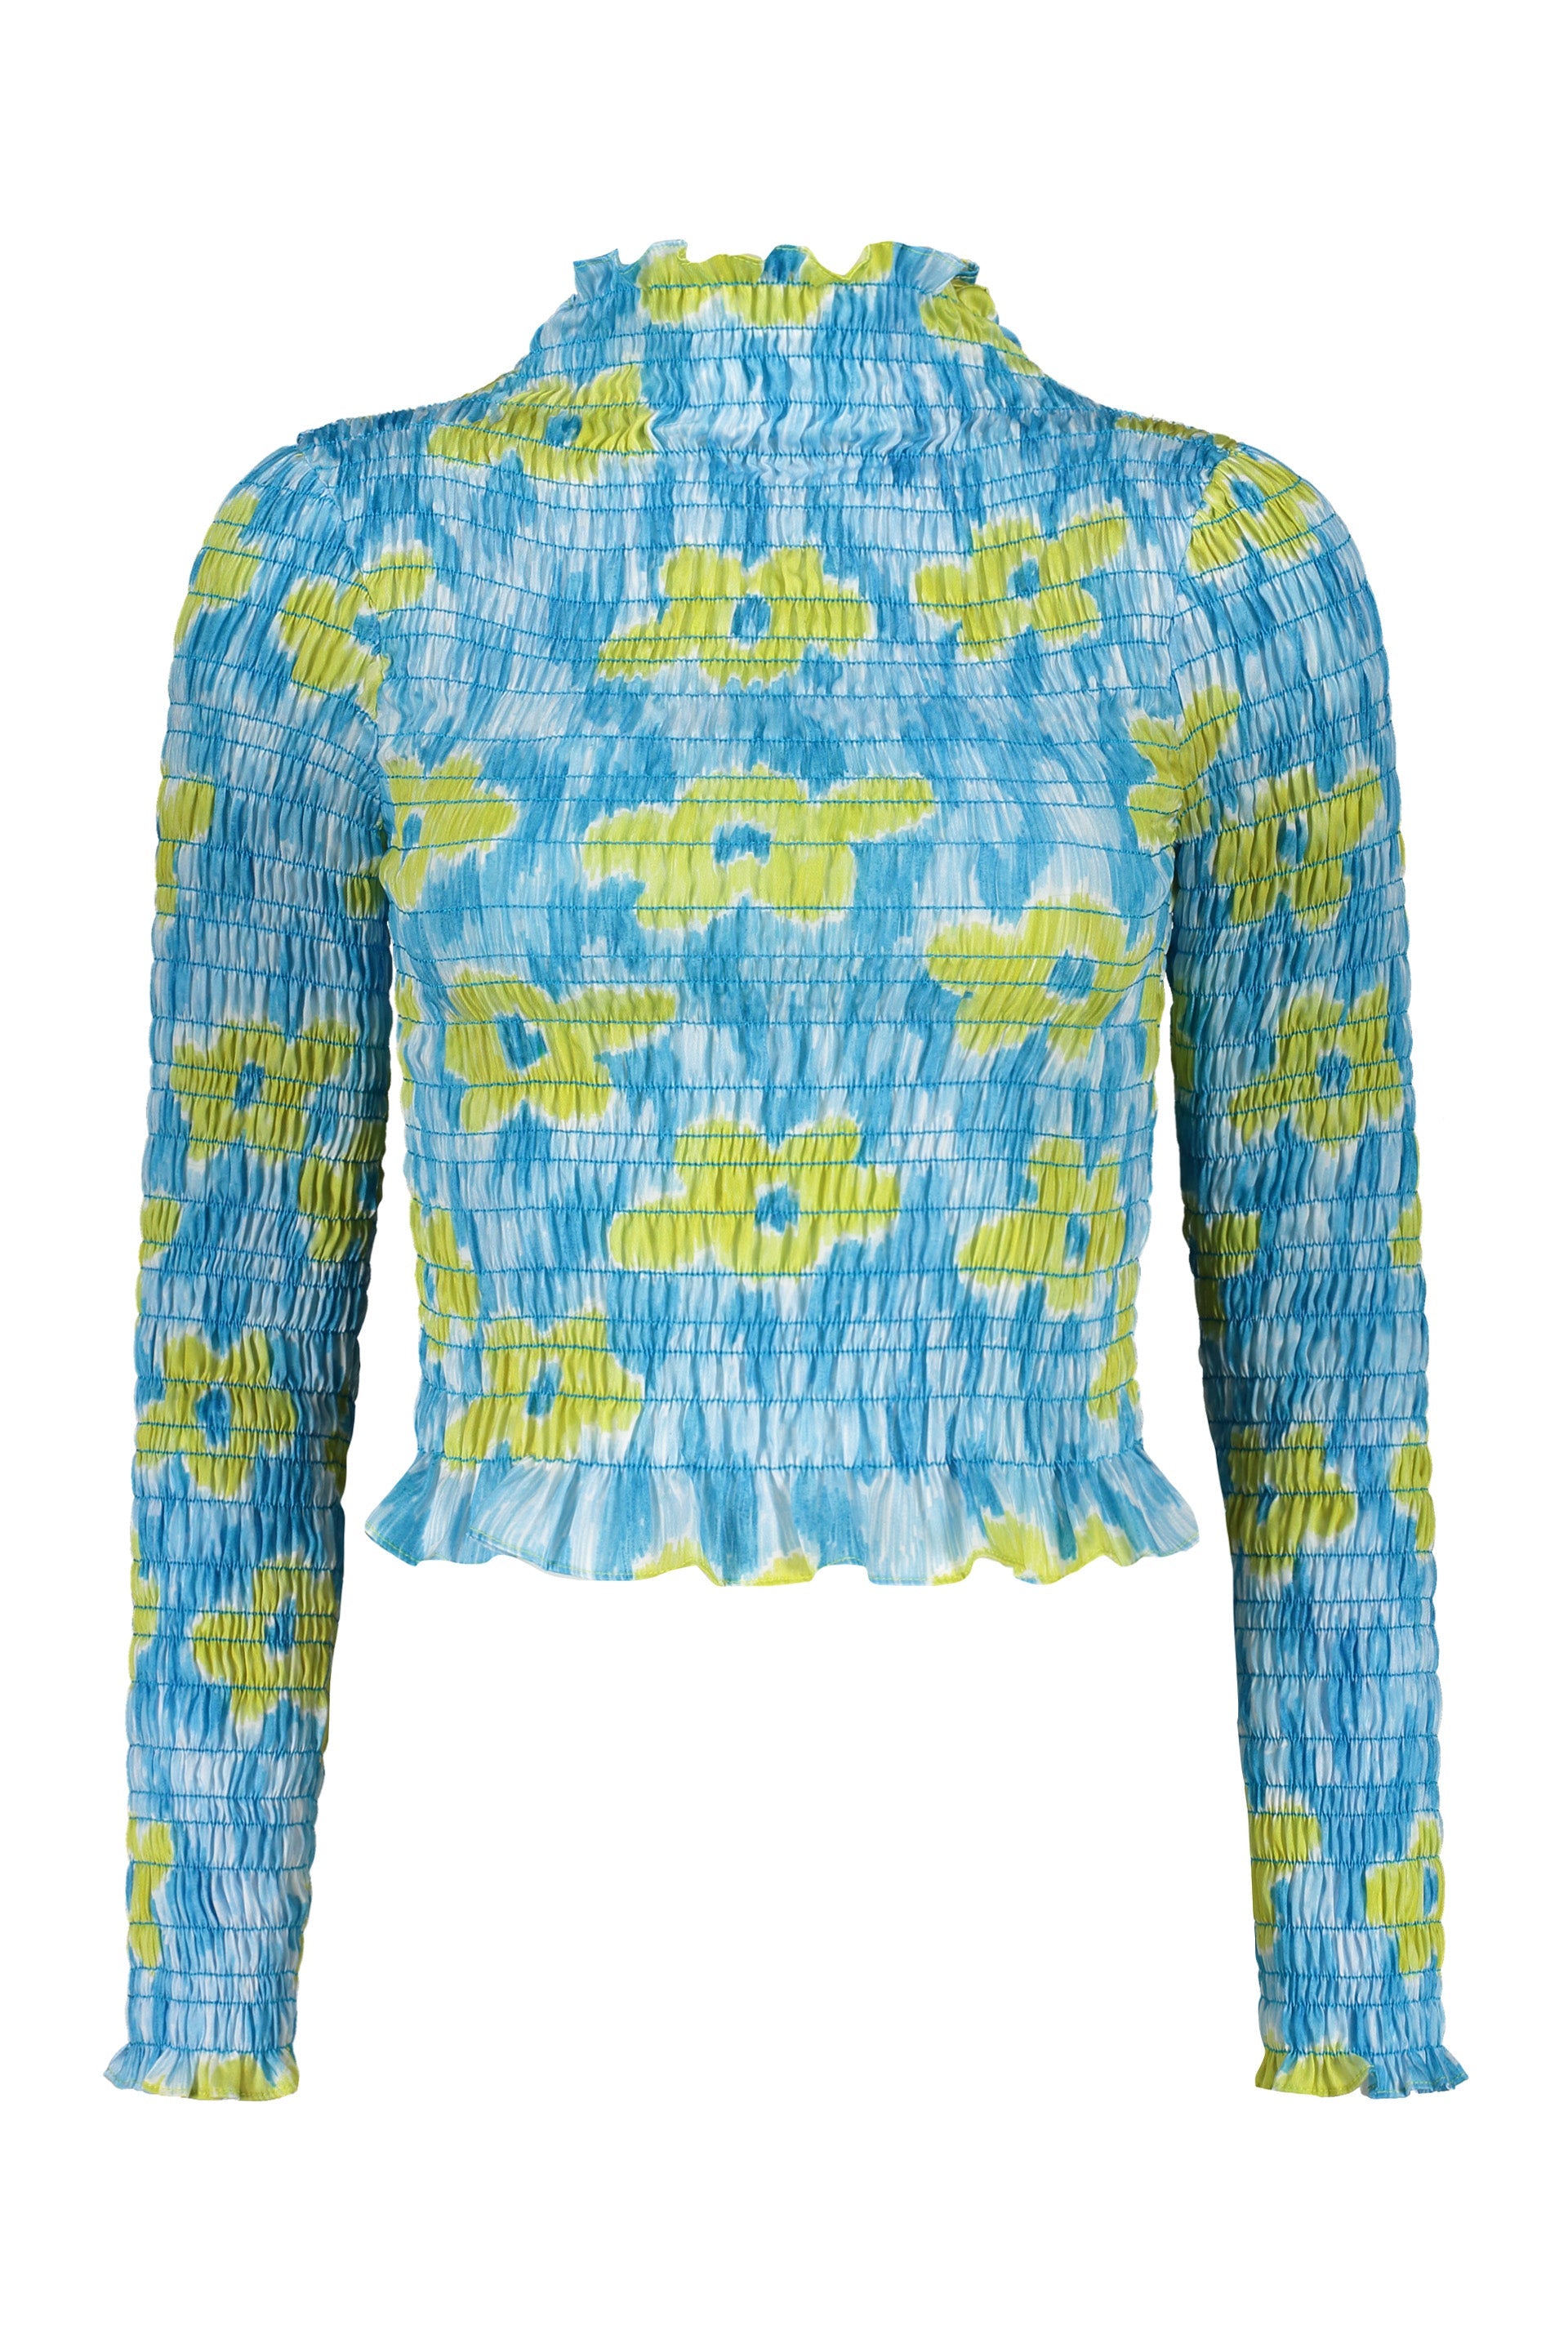 Amy-Crookes-OUTLET-SALE-Printed-long-sleeve-top-Shirts-XSS-ARCHIVE-COLLECTION.jpg